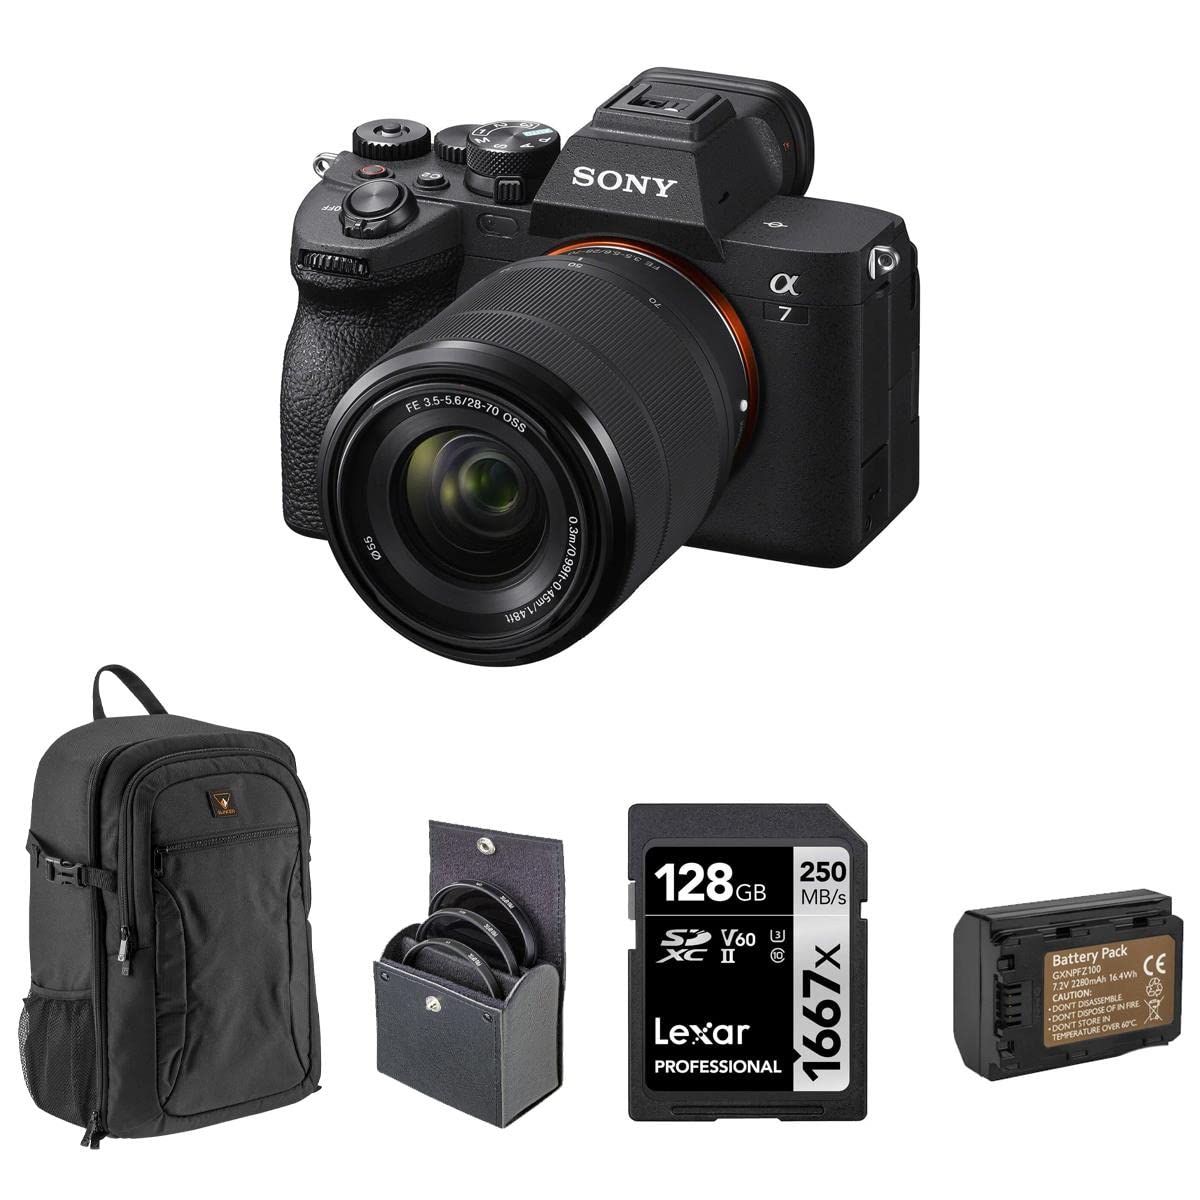 Sony Alpha a7 IV Mirrorless Digital Camera with FE 28-70mm f/3.5-5.6 OSS Lens Bundle with 128GB Memory Card, Backpack, Battery, 55mm Filter Kit